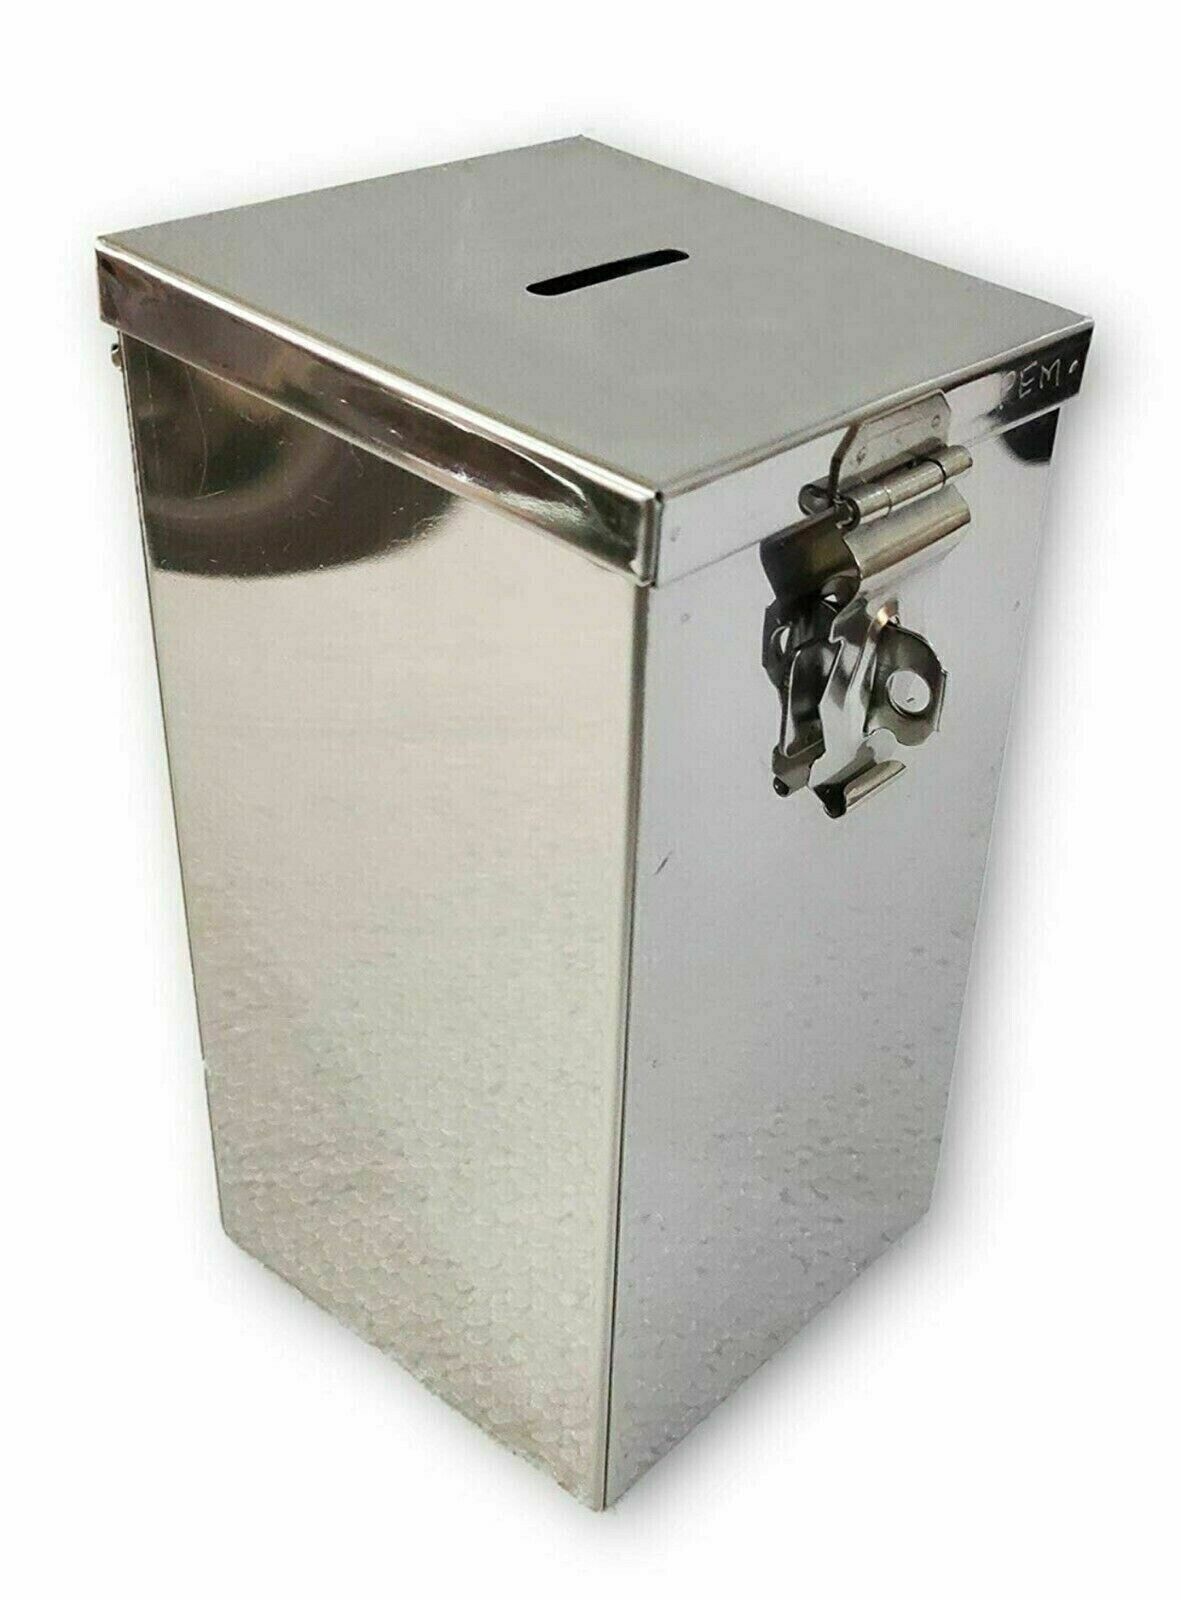 Stainless Steel Long Donation Coin Box And Money Piggy Bank Coin Gullak Free/S.